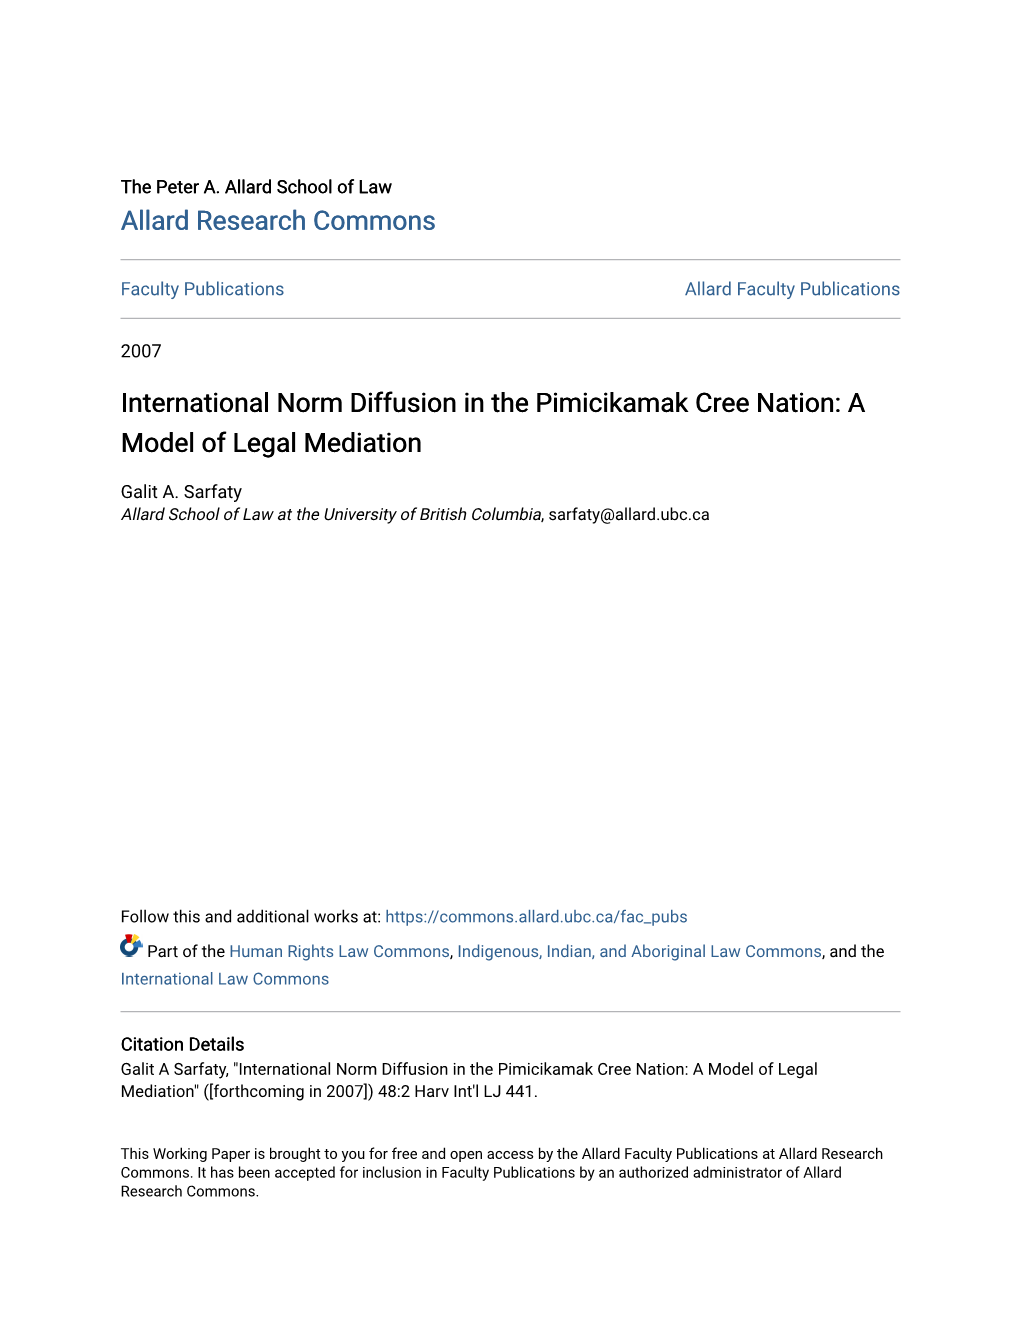 International Norm Diffusion in the Pimicikamak Cree Nation: a Model of Legal Mediation